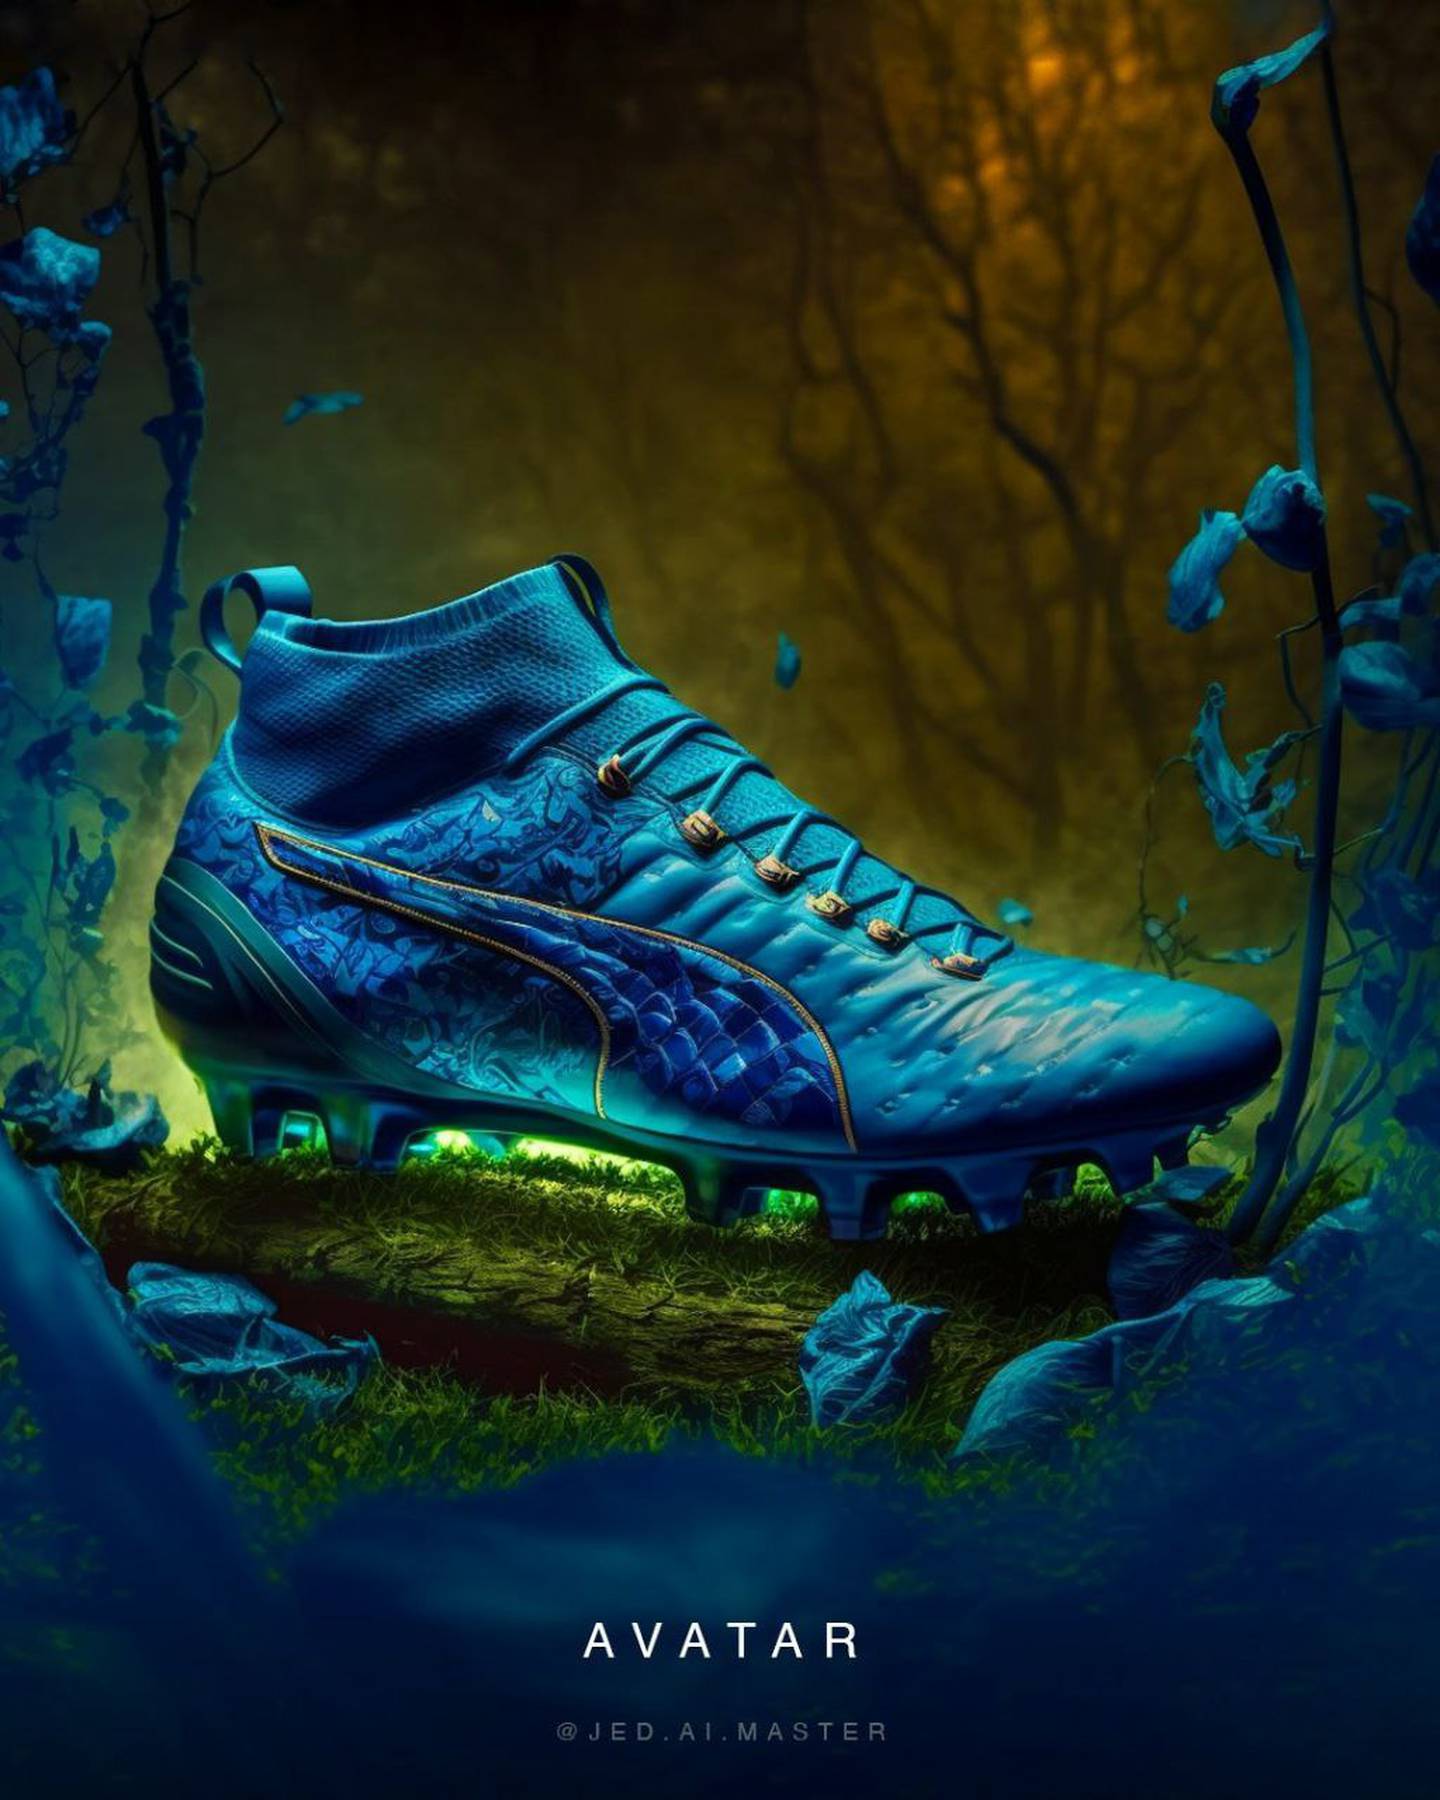 Puma sneakers designed by Midjourney Artificial Intelligence